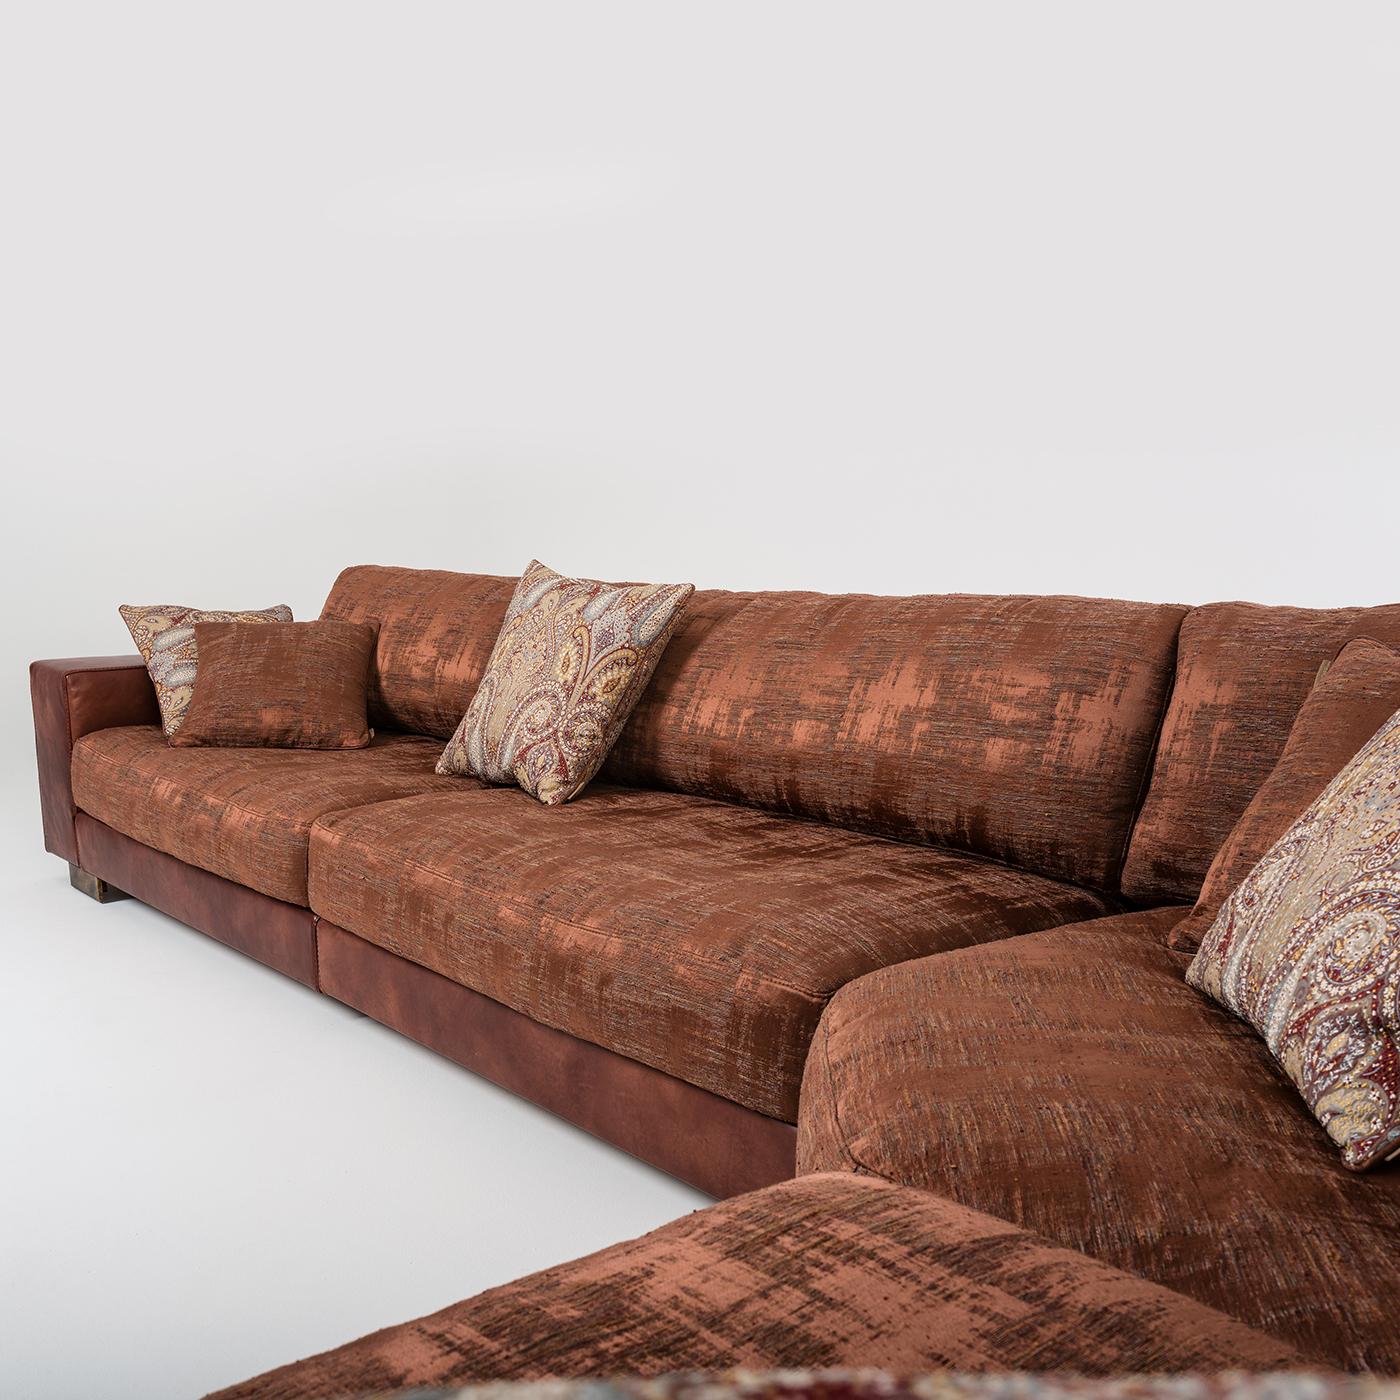 This beautiful modular sofa from the Tribeca collection is the epitome of modernity and elegance rolled into one and there are a variety of options for composing a personalized piece. With fabric upholstery, wide leather sides, low metal legs, and a